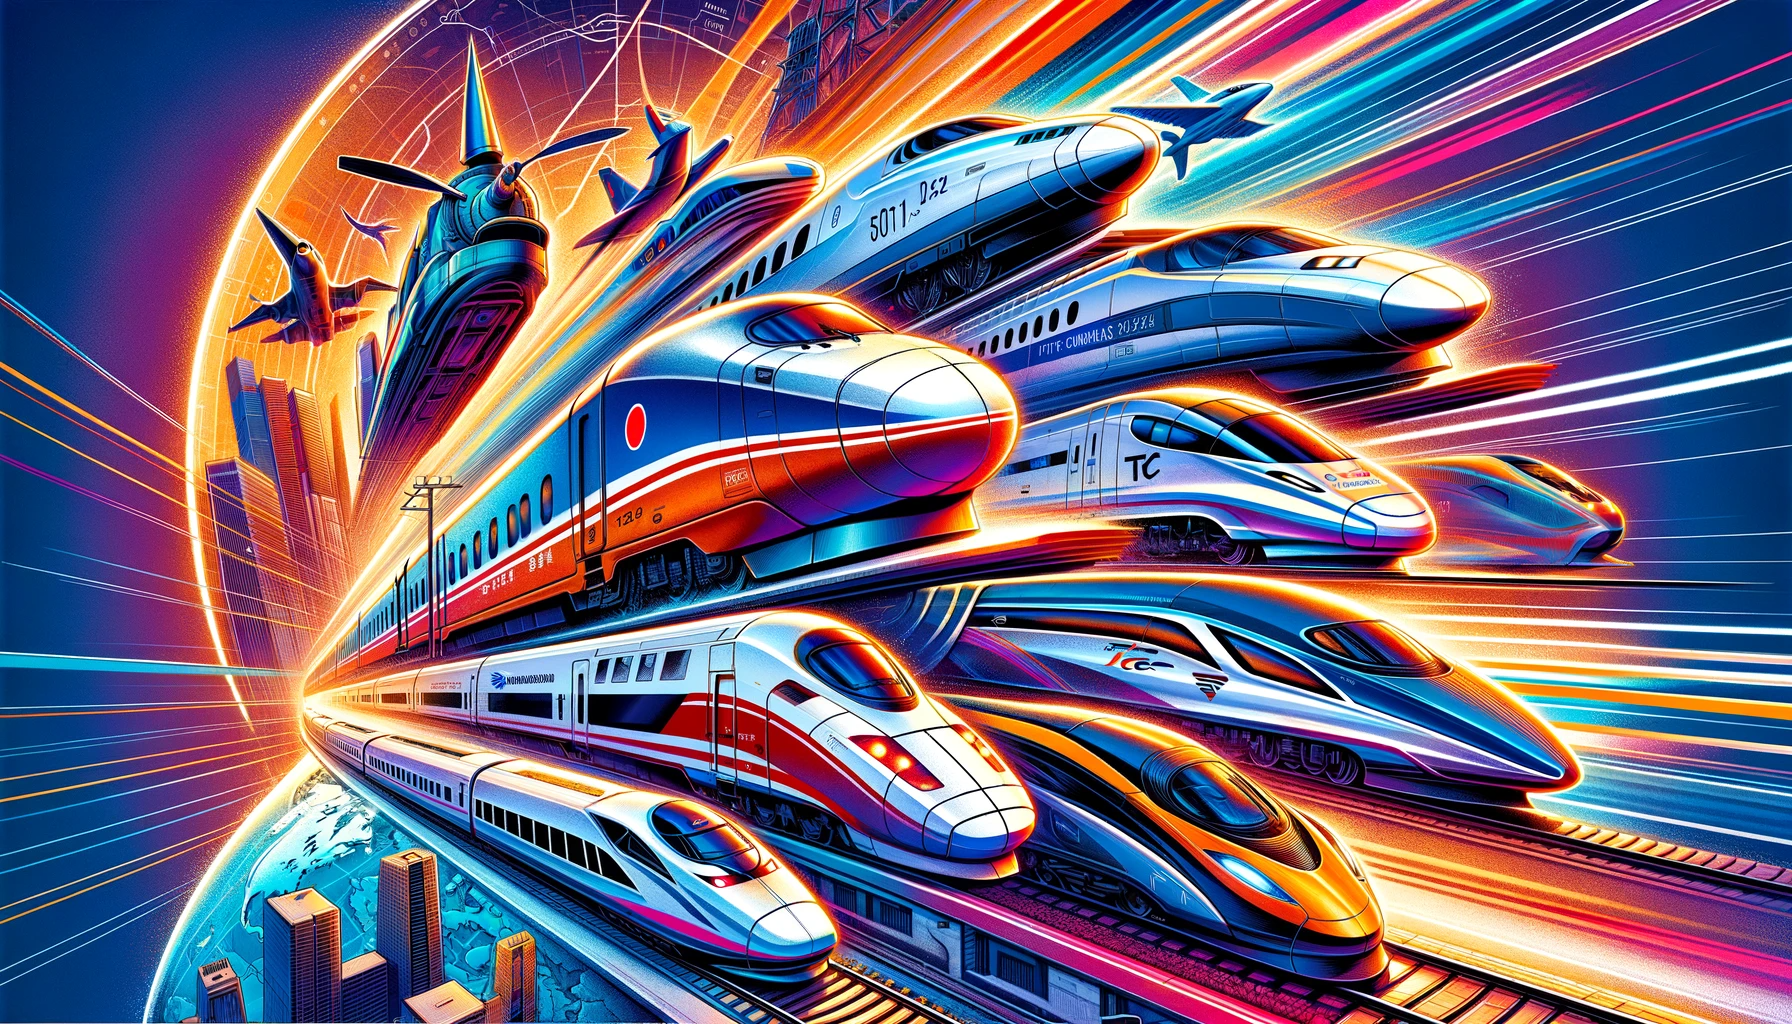 TOP 7 fastest high-speed trains in the world